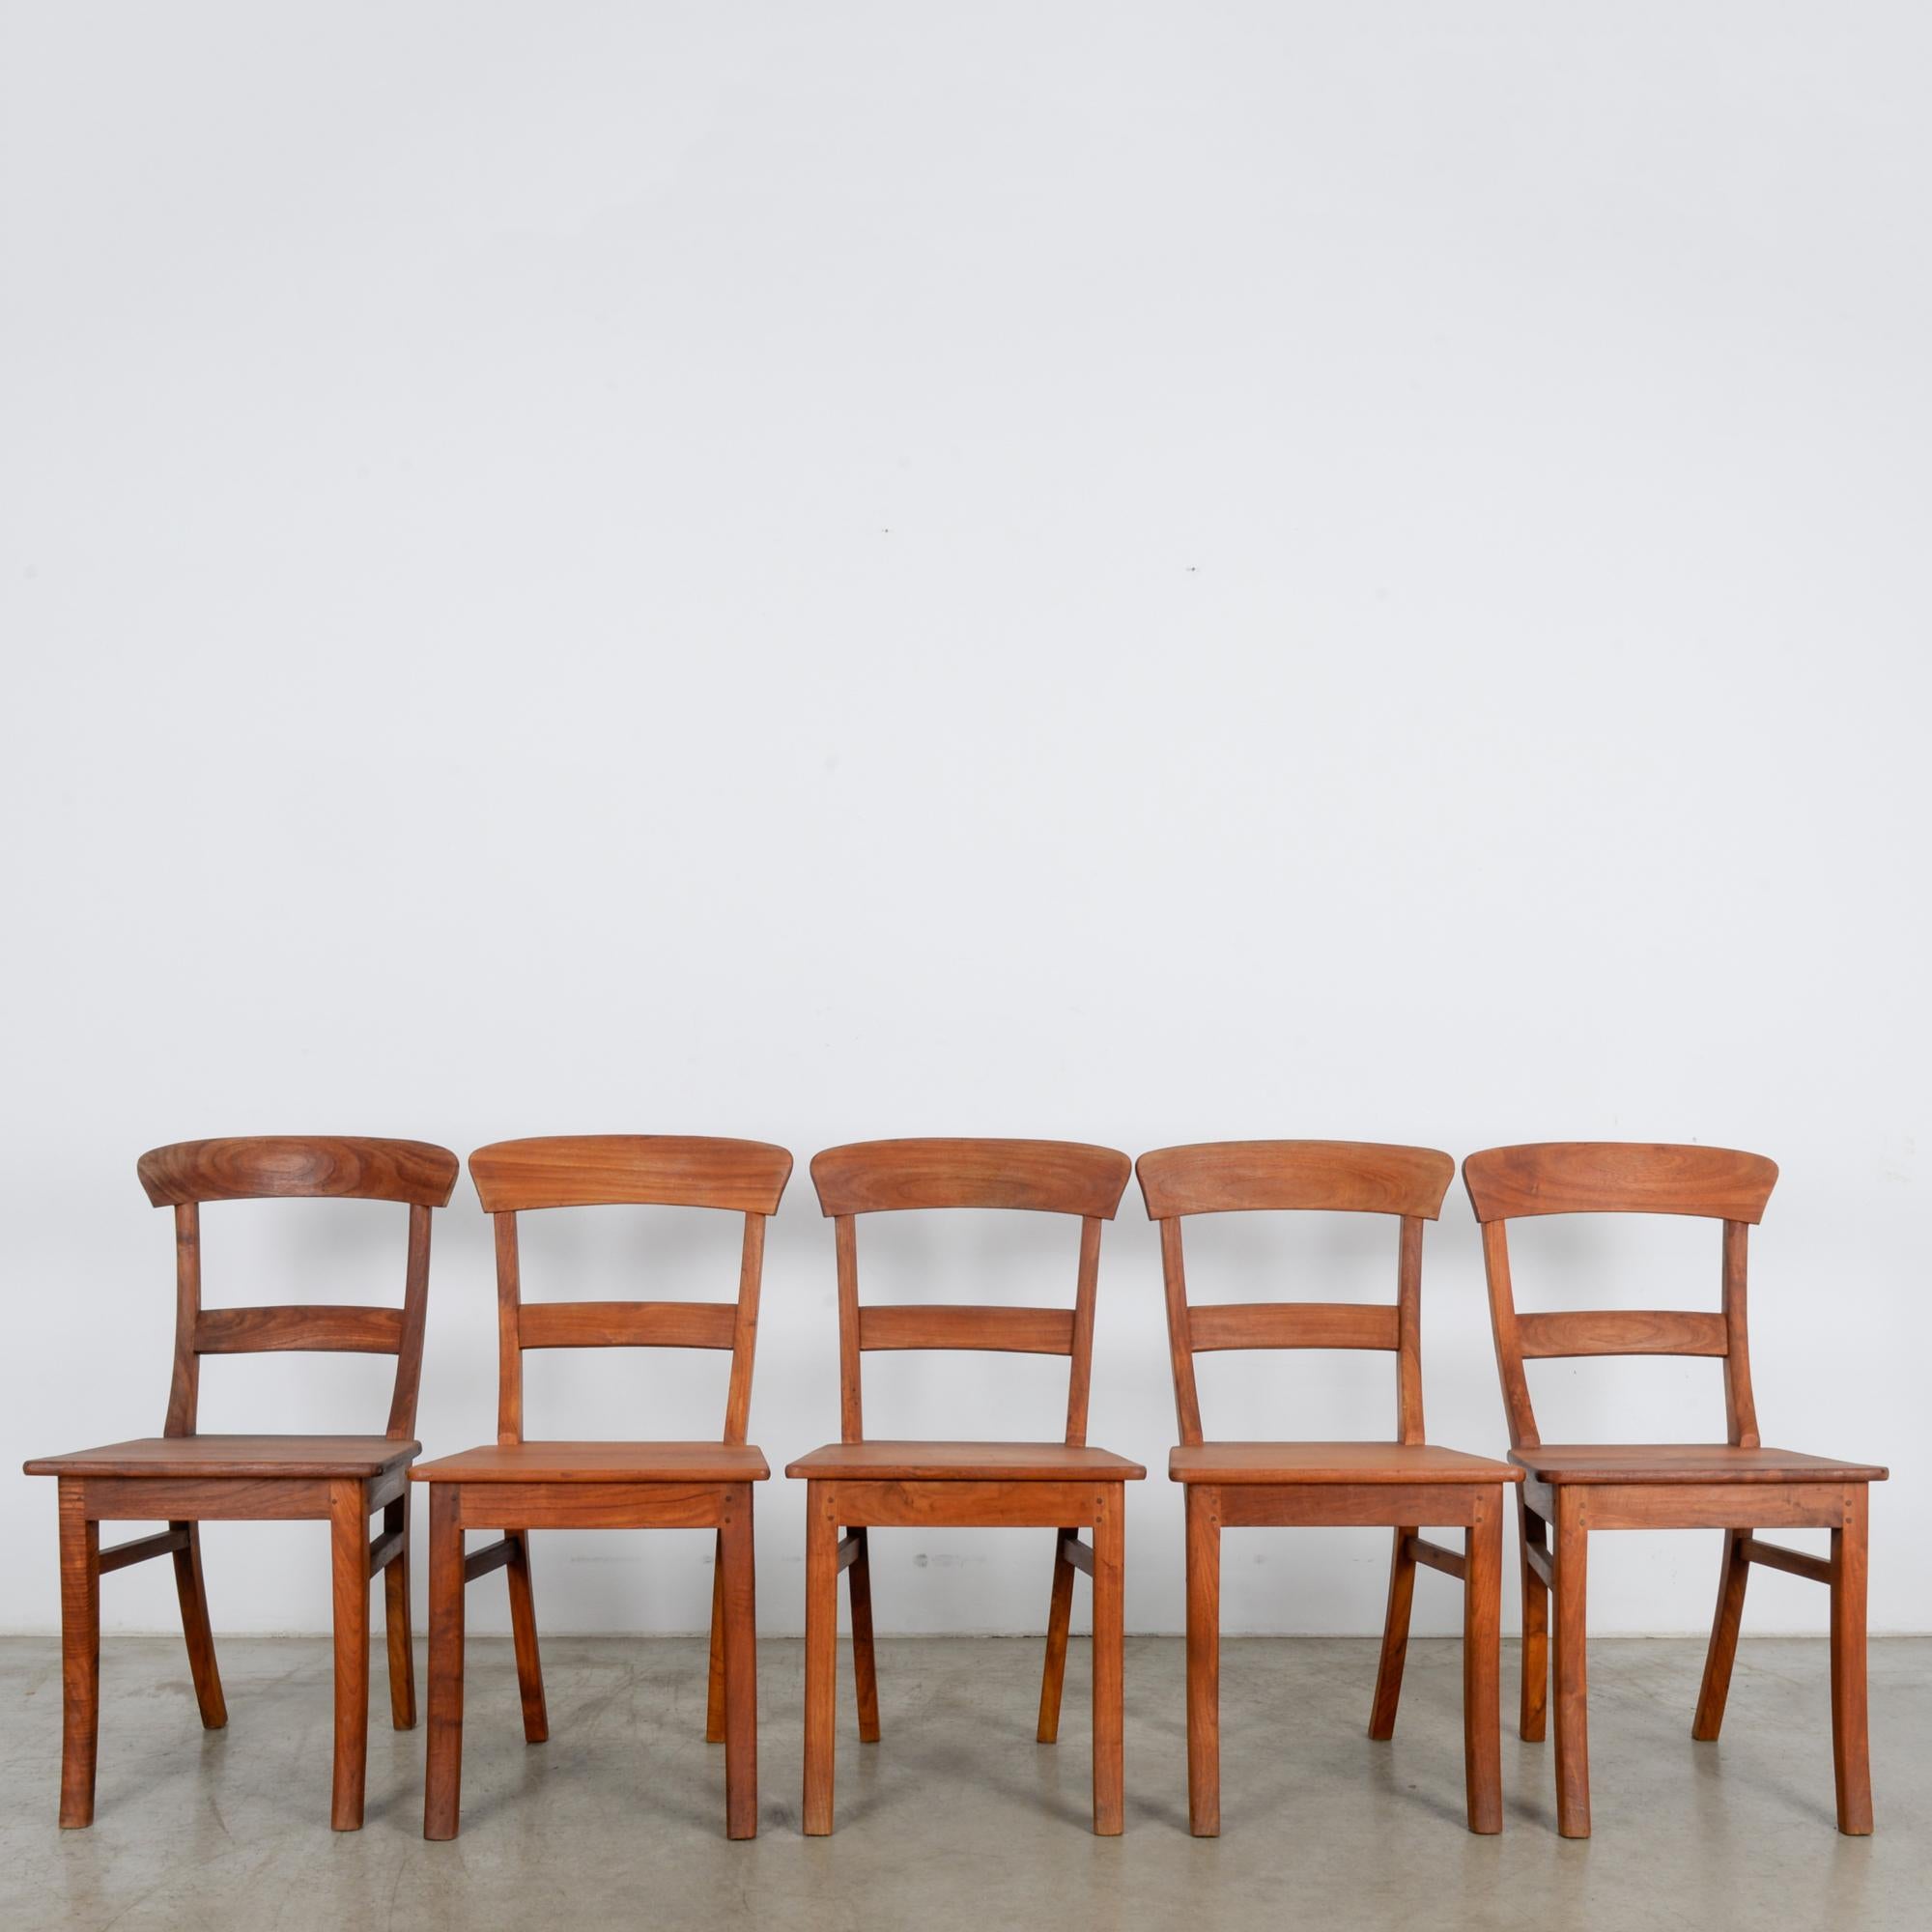 A distinctive set of five European dining chairs. Visible from the side are the distinctive arcs of the splayed legs and back, which will bring style and elegance to your interior space. A gentle lean supports a relaxed posture, while the smooth and